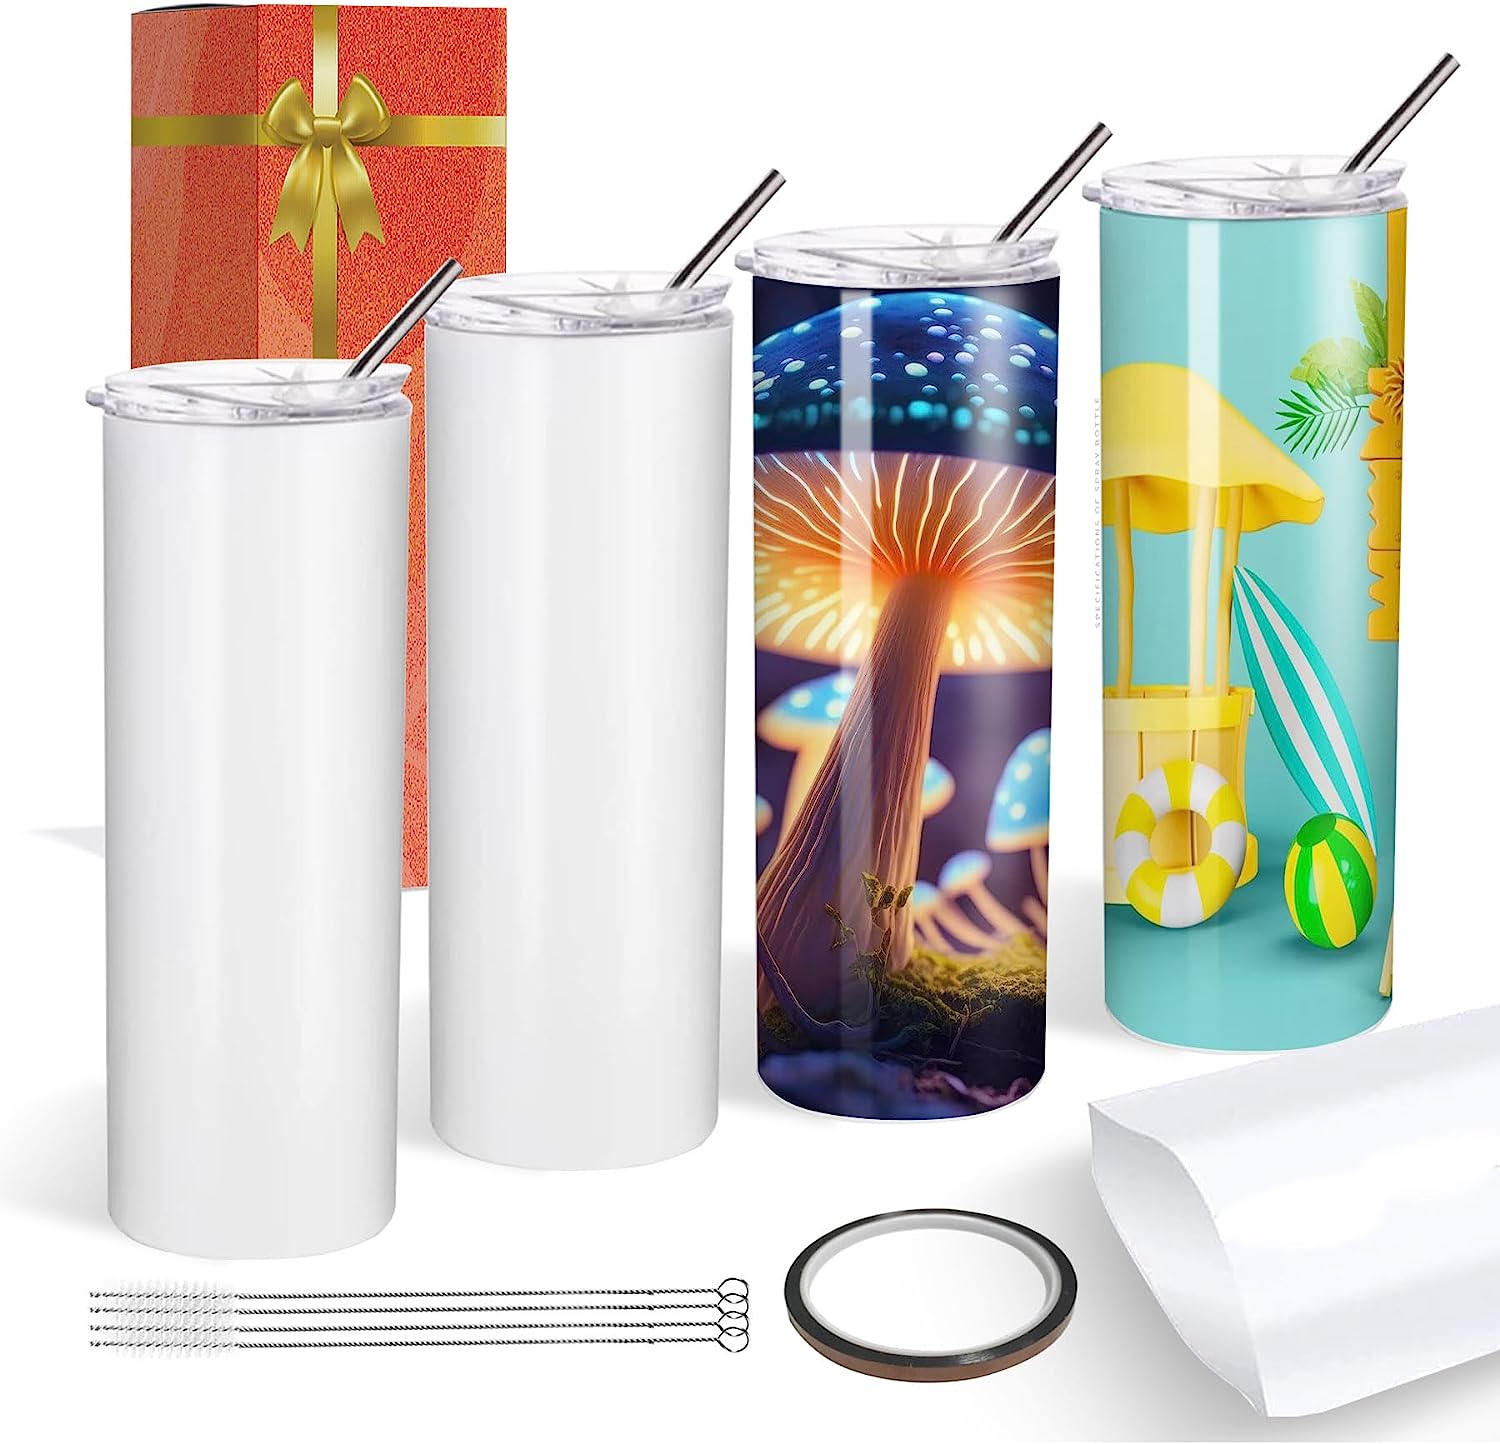 A-SUB 20 OZ Sublimation Tumbler Gift Set  with Straw and Lid